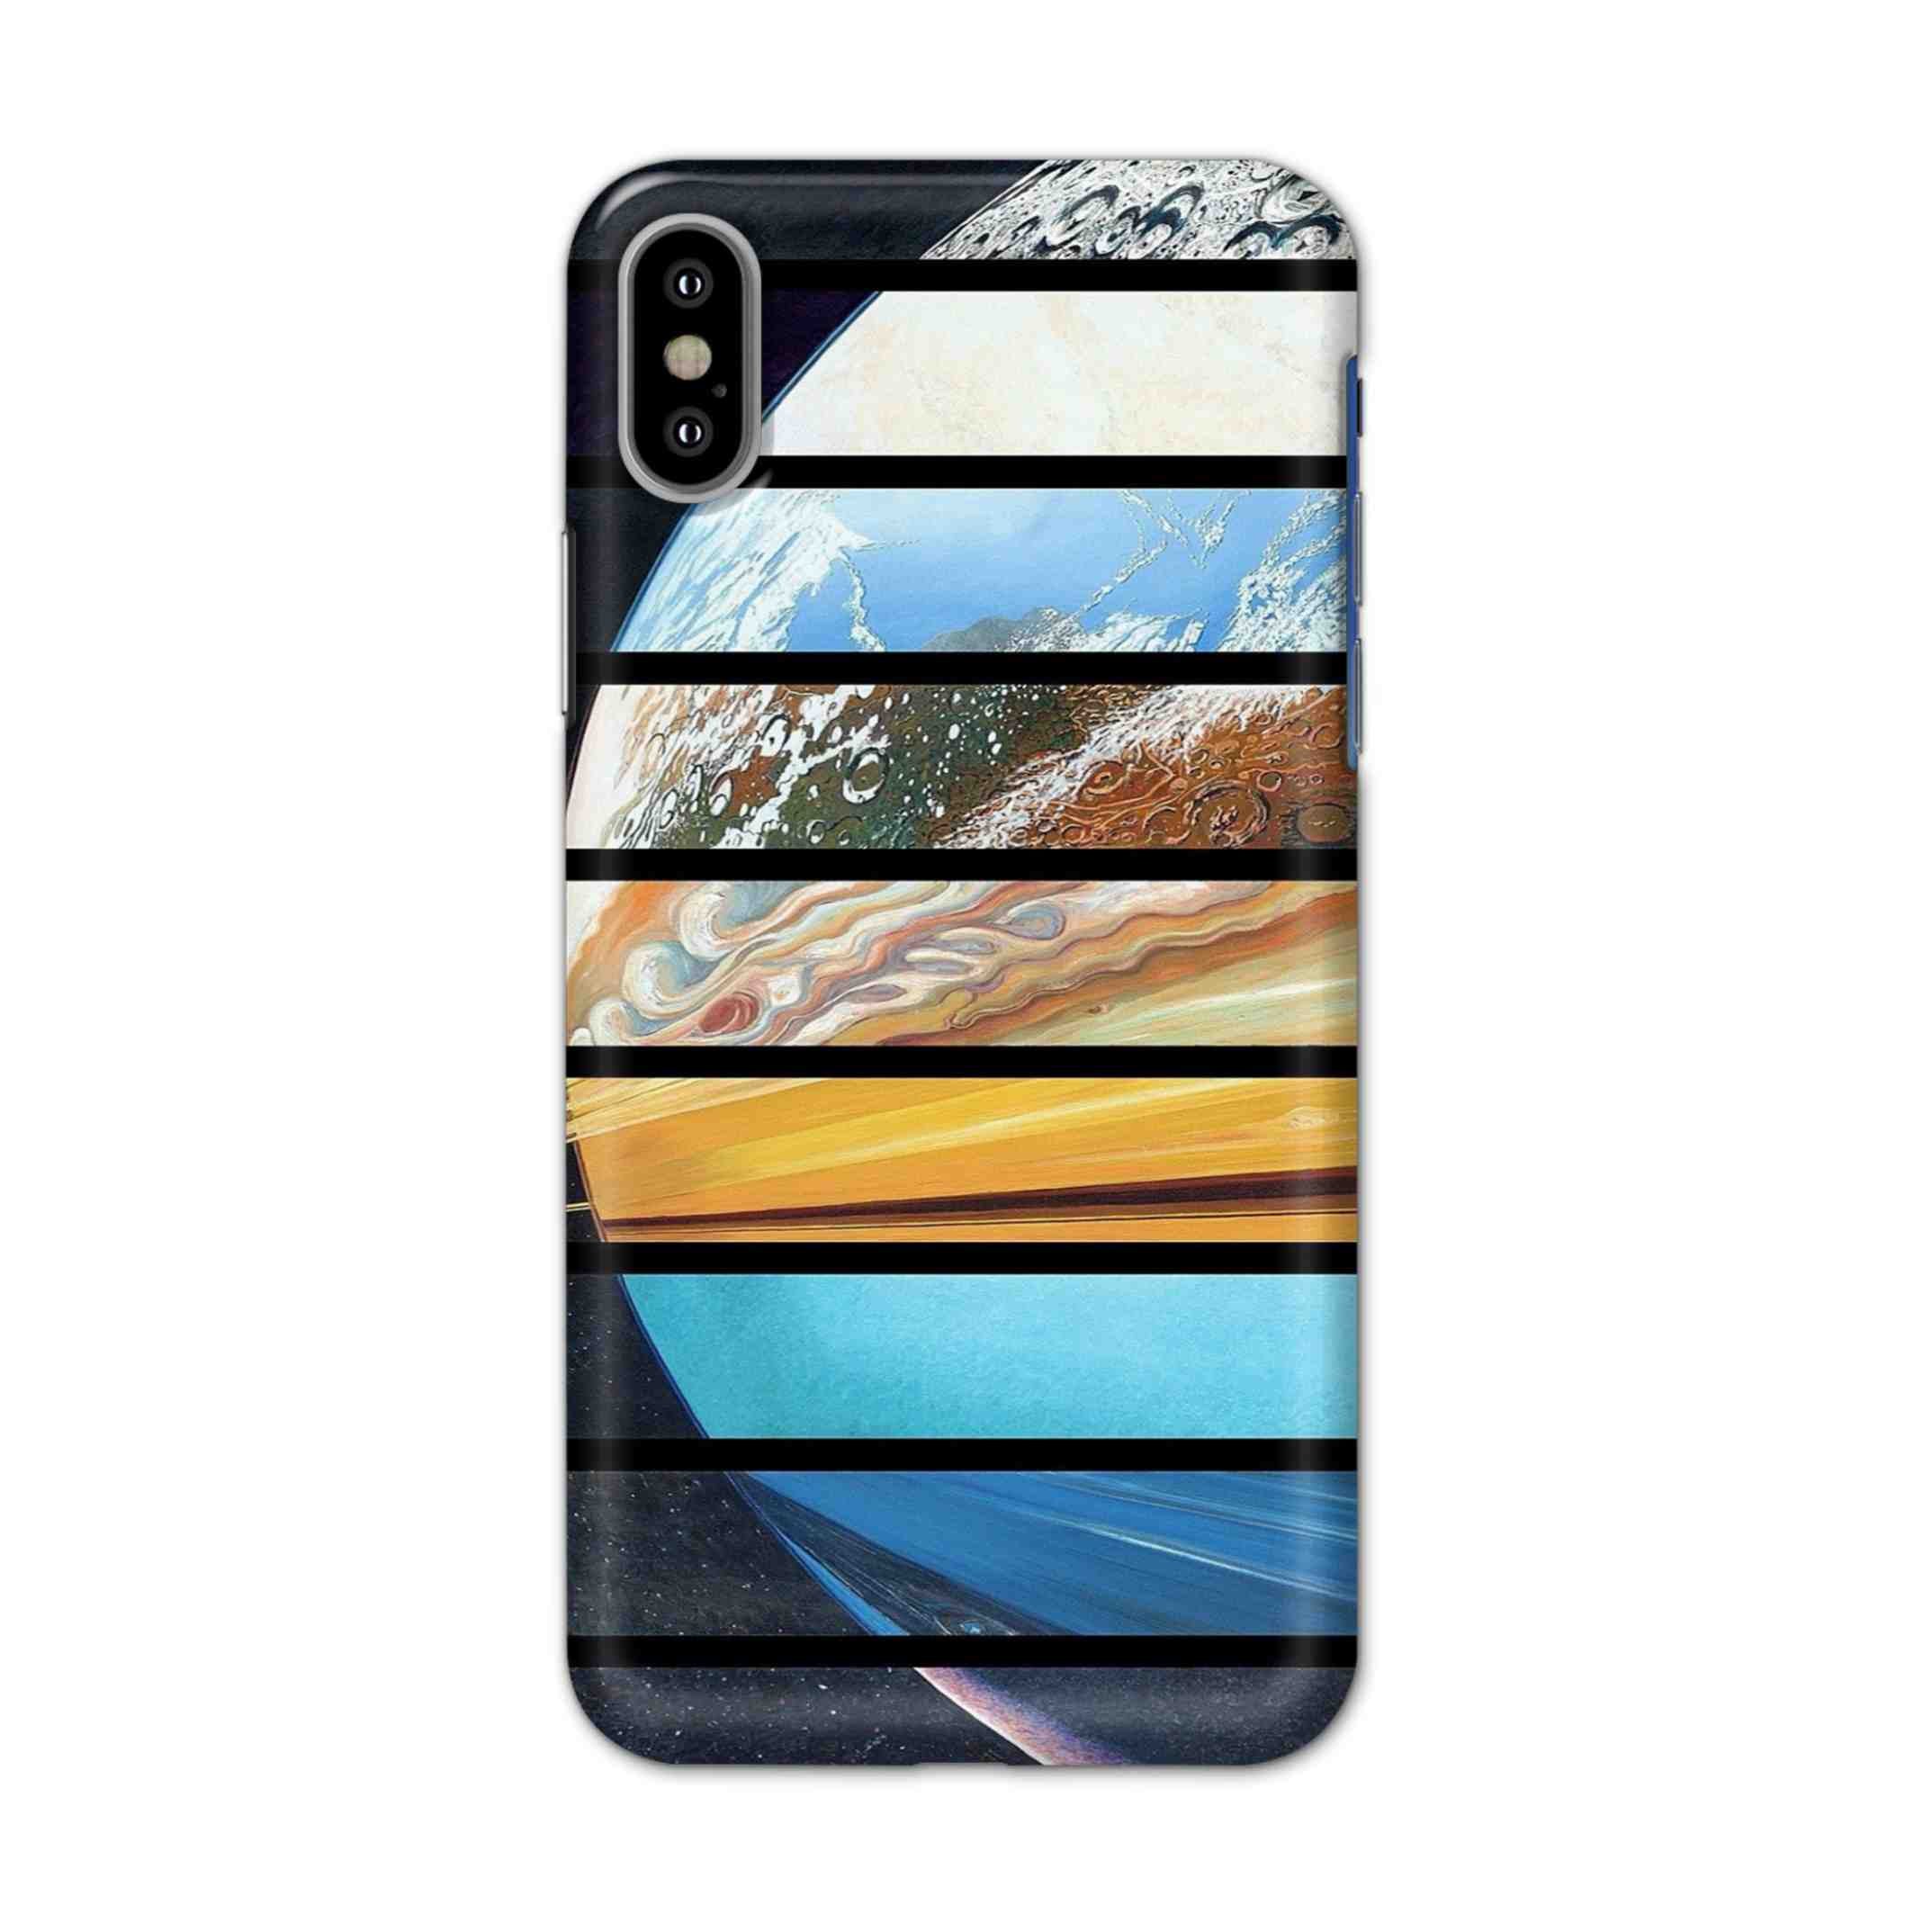 Buy Colourful Earth Hard Back Mobile Phone Case/Cover For iPhone X Online